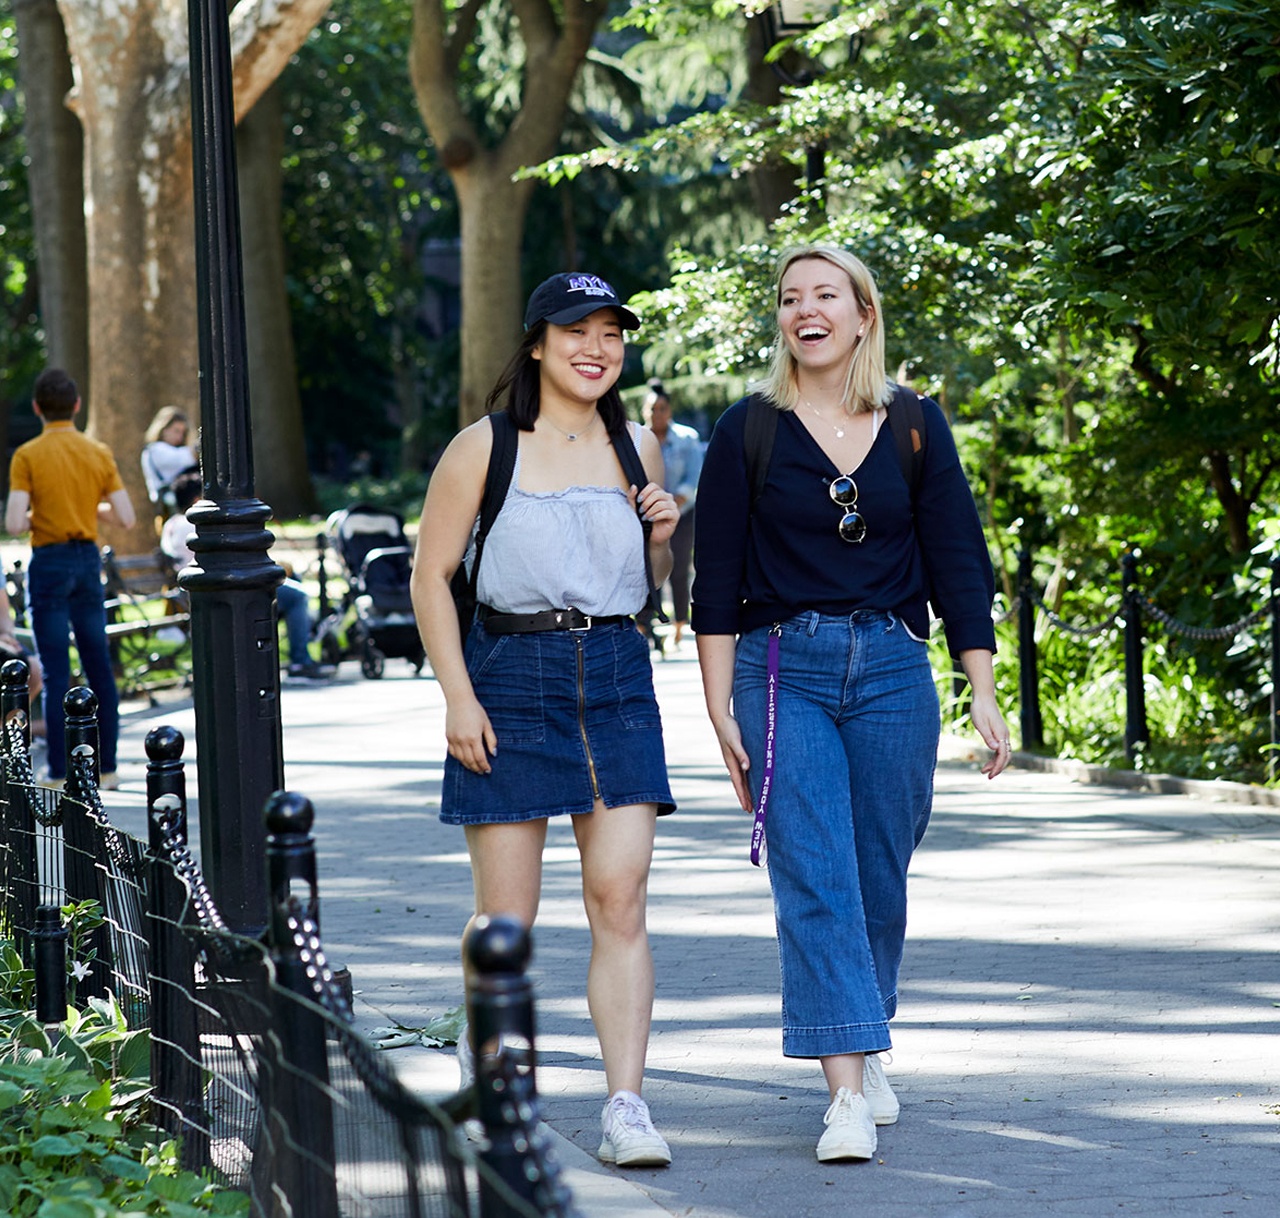 Two students walking in Washington Square Park.